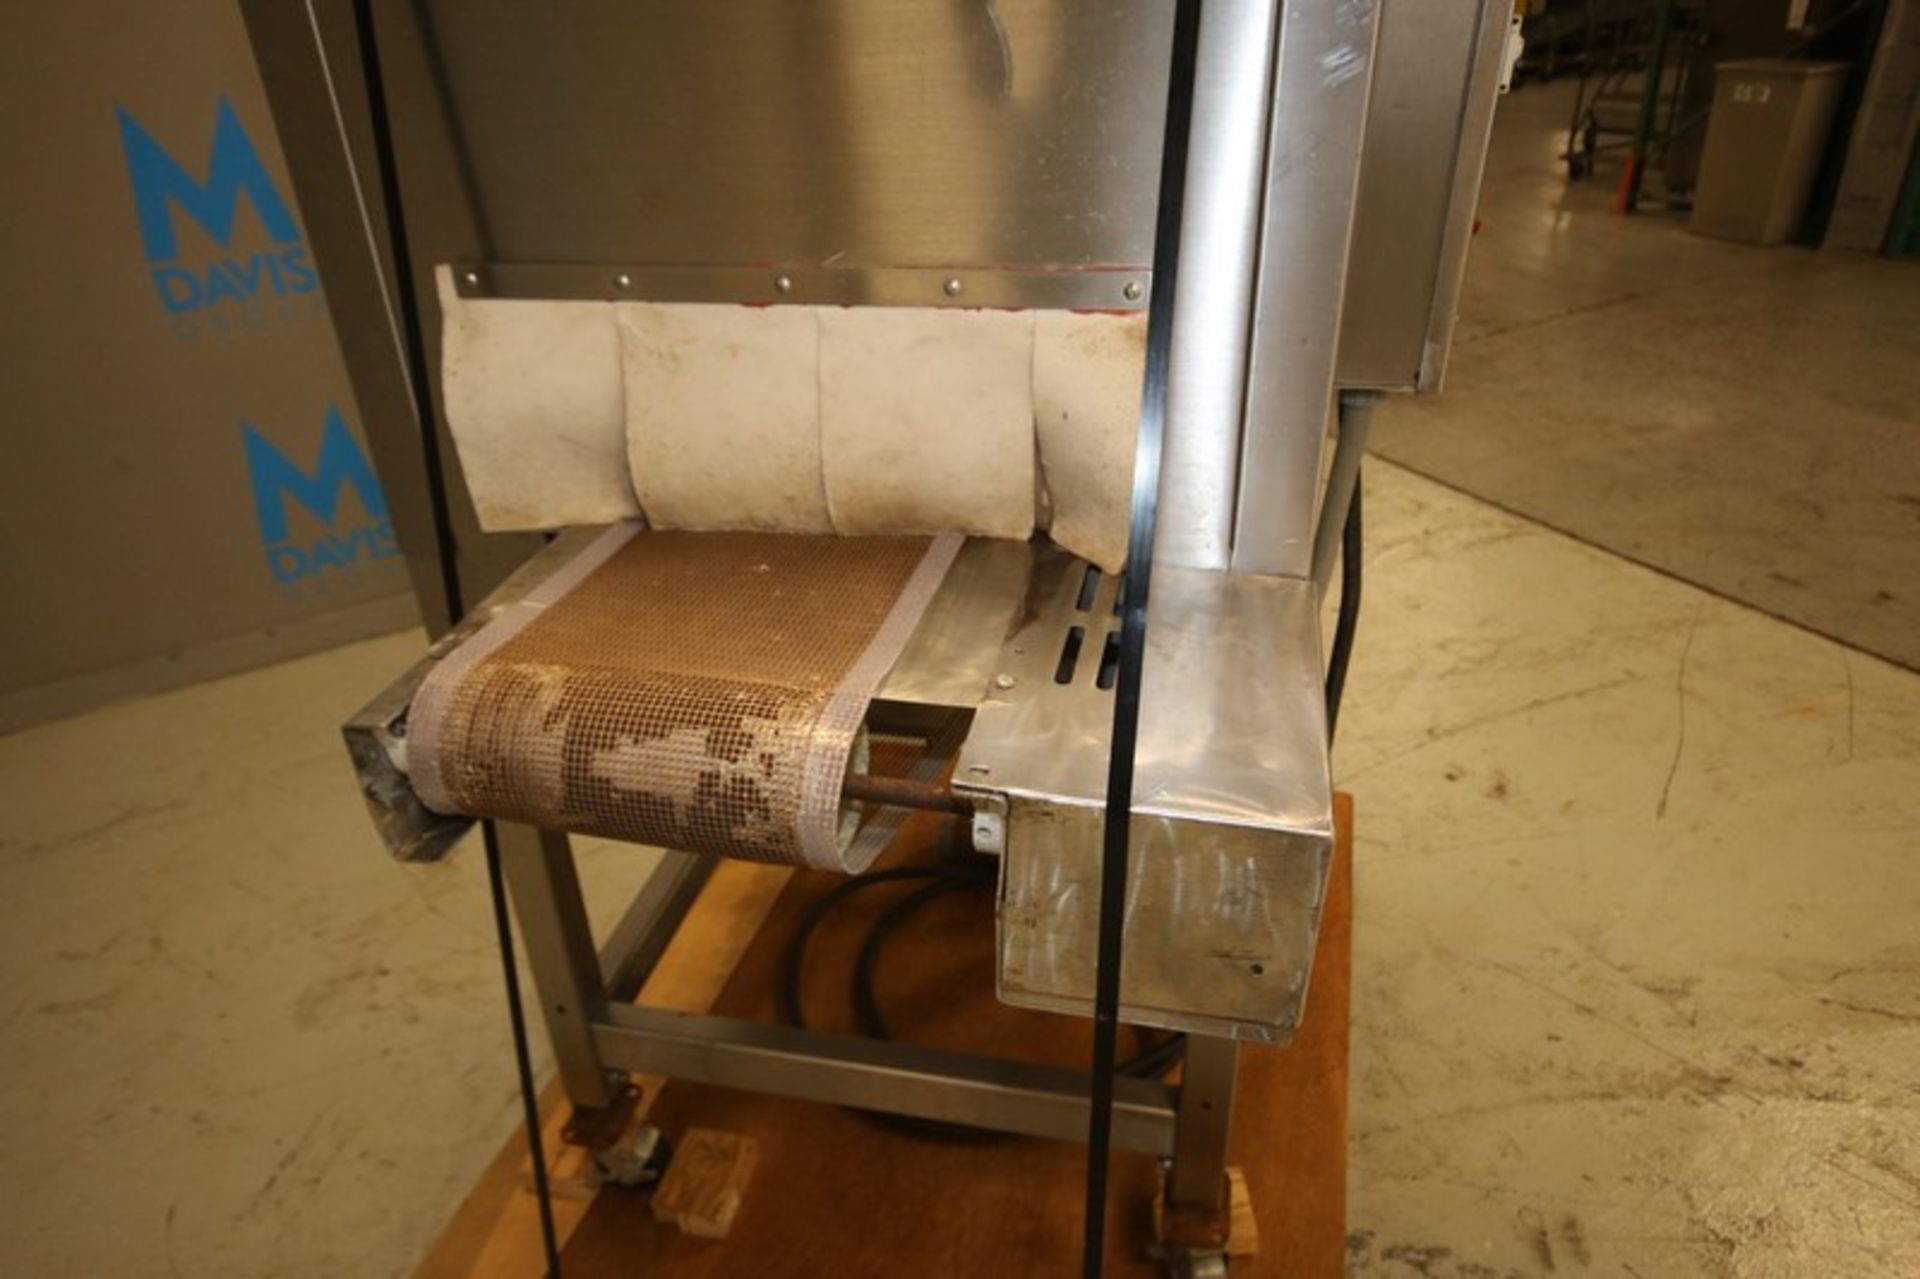 Shanklin 11" W x 6.5" H S/S Shrink Wrap Heat Tunnel, 115 V, Mounted on Casters (INV#88602)(Located @ - Bild 6 aus 8